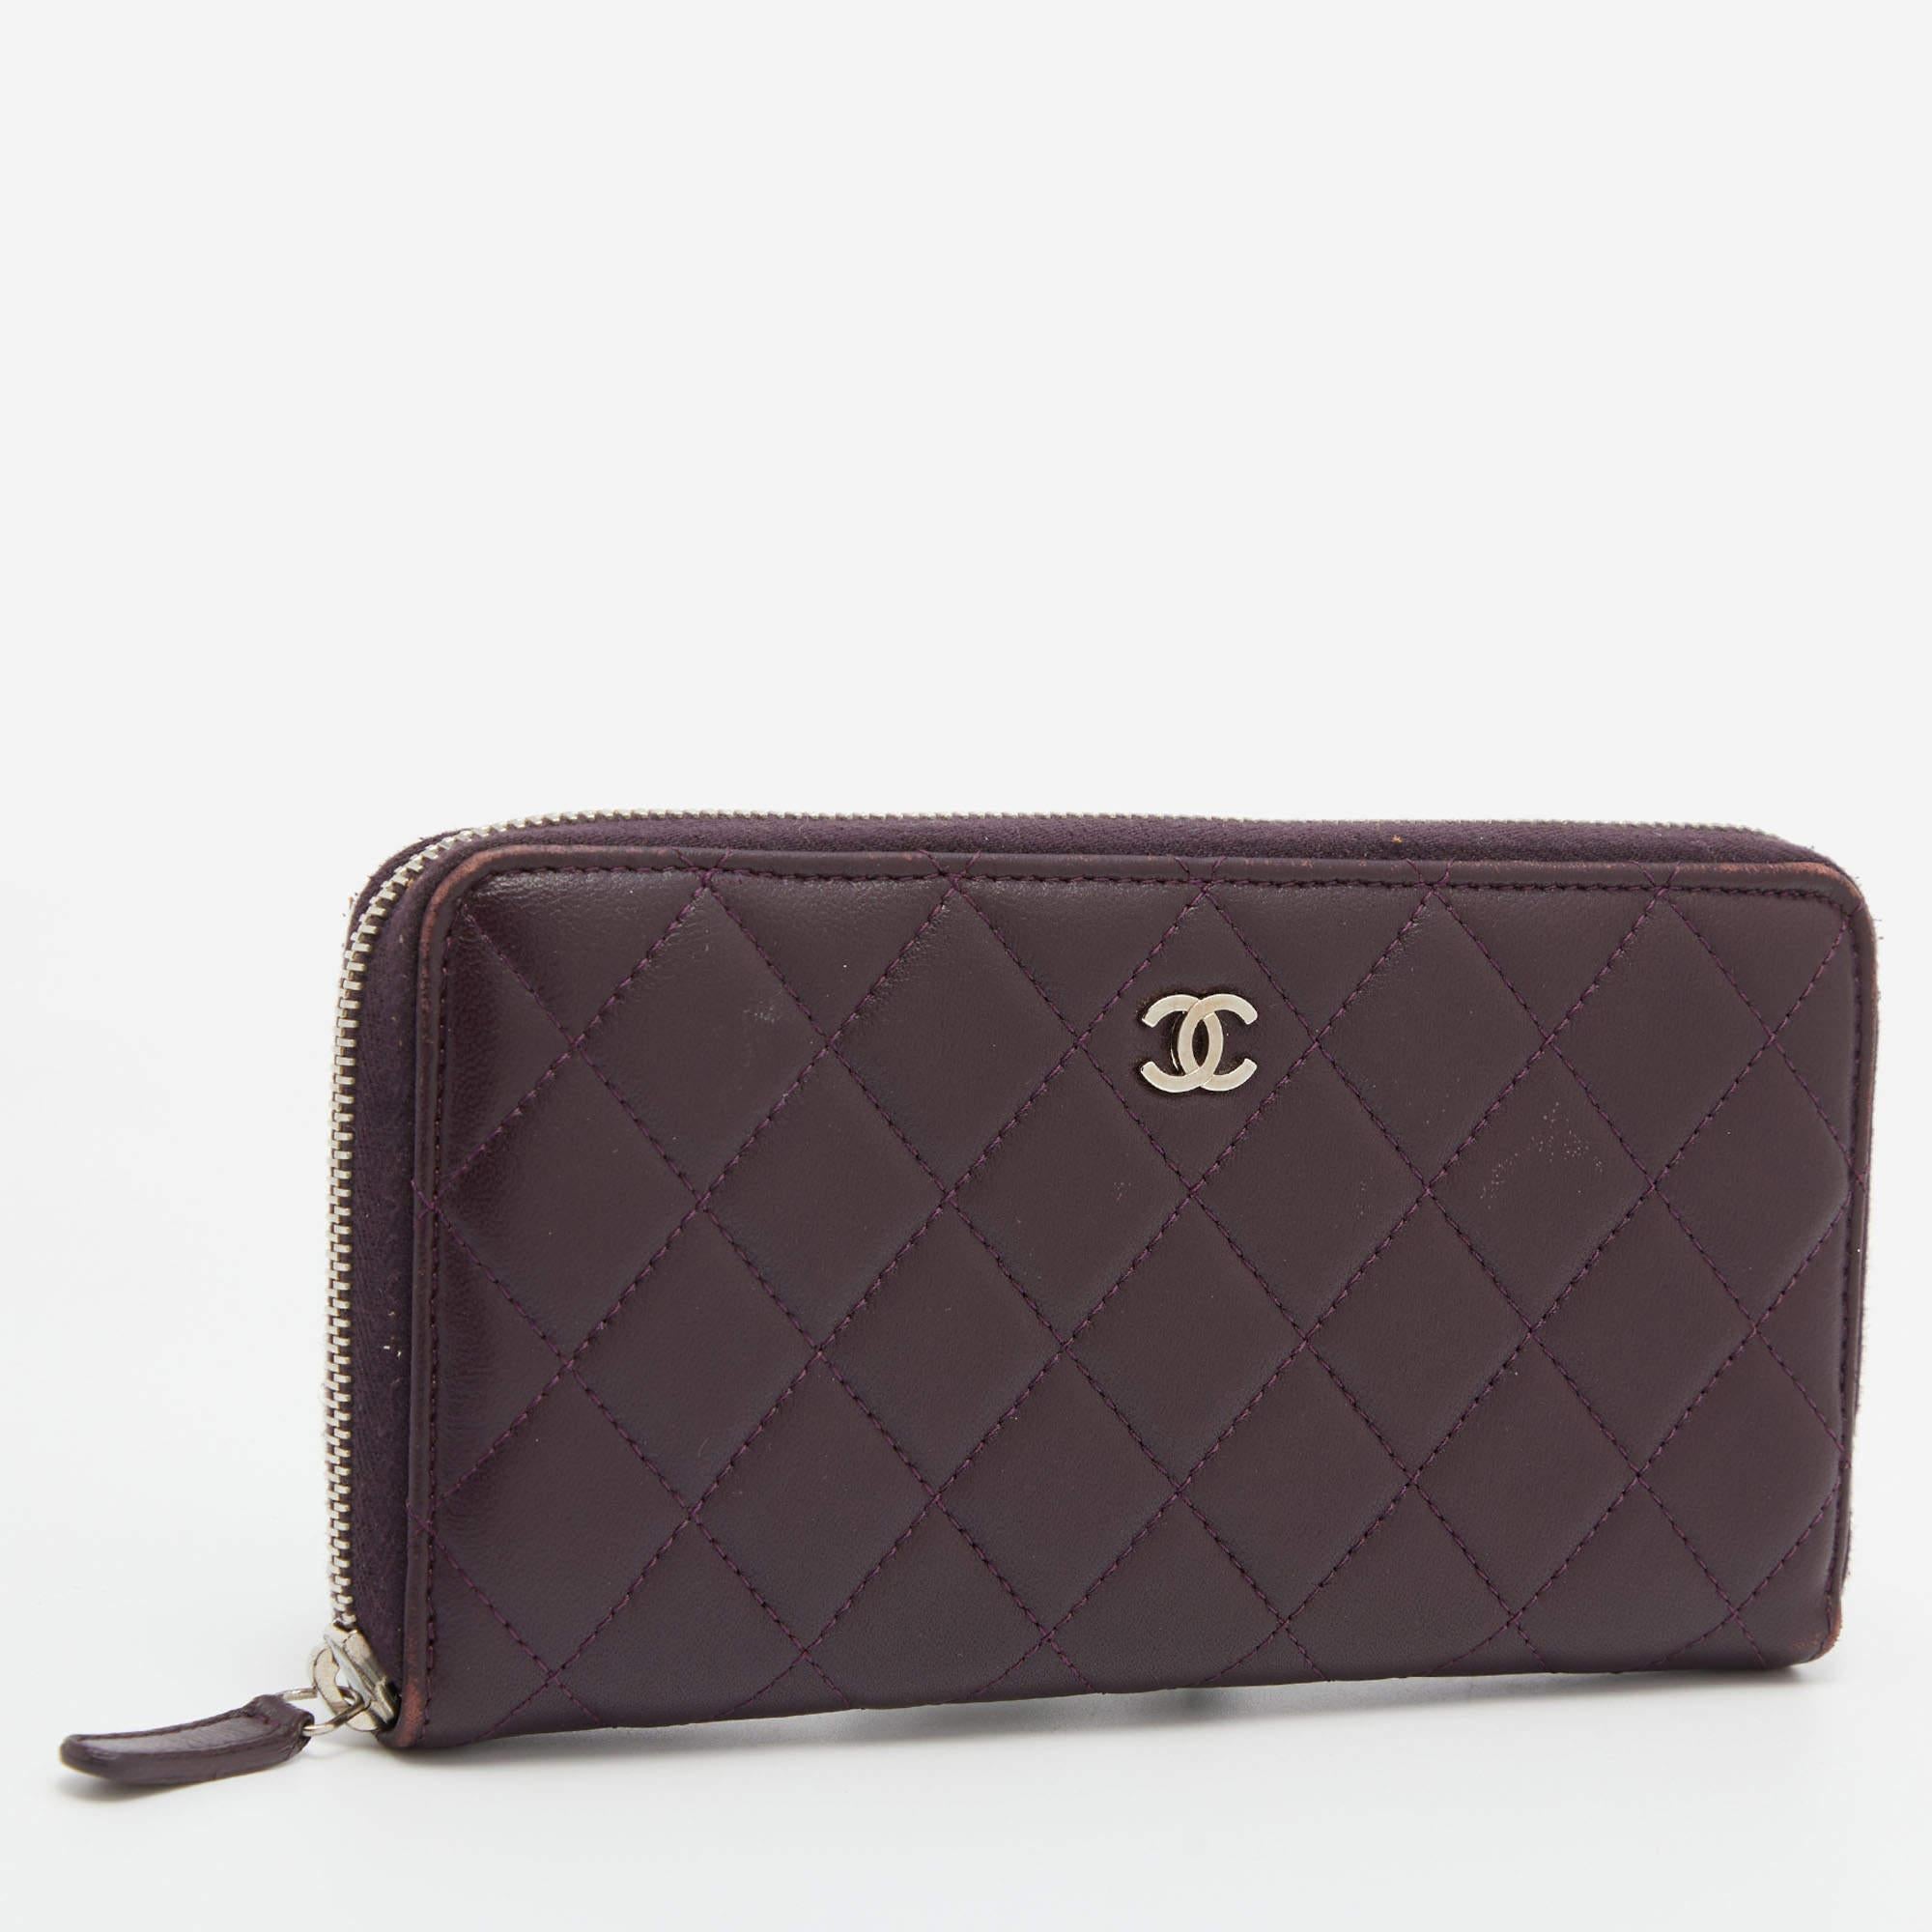 Chanel Purple Quilted Leather CC Zip Around Wallet In Fair Condition For Sale In Dubai, Al Qouz 2